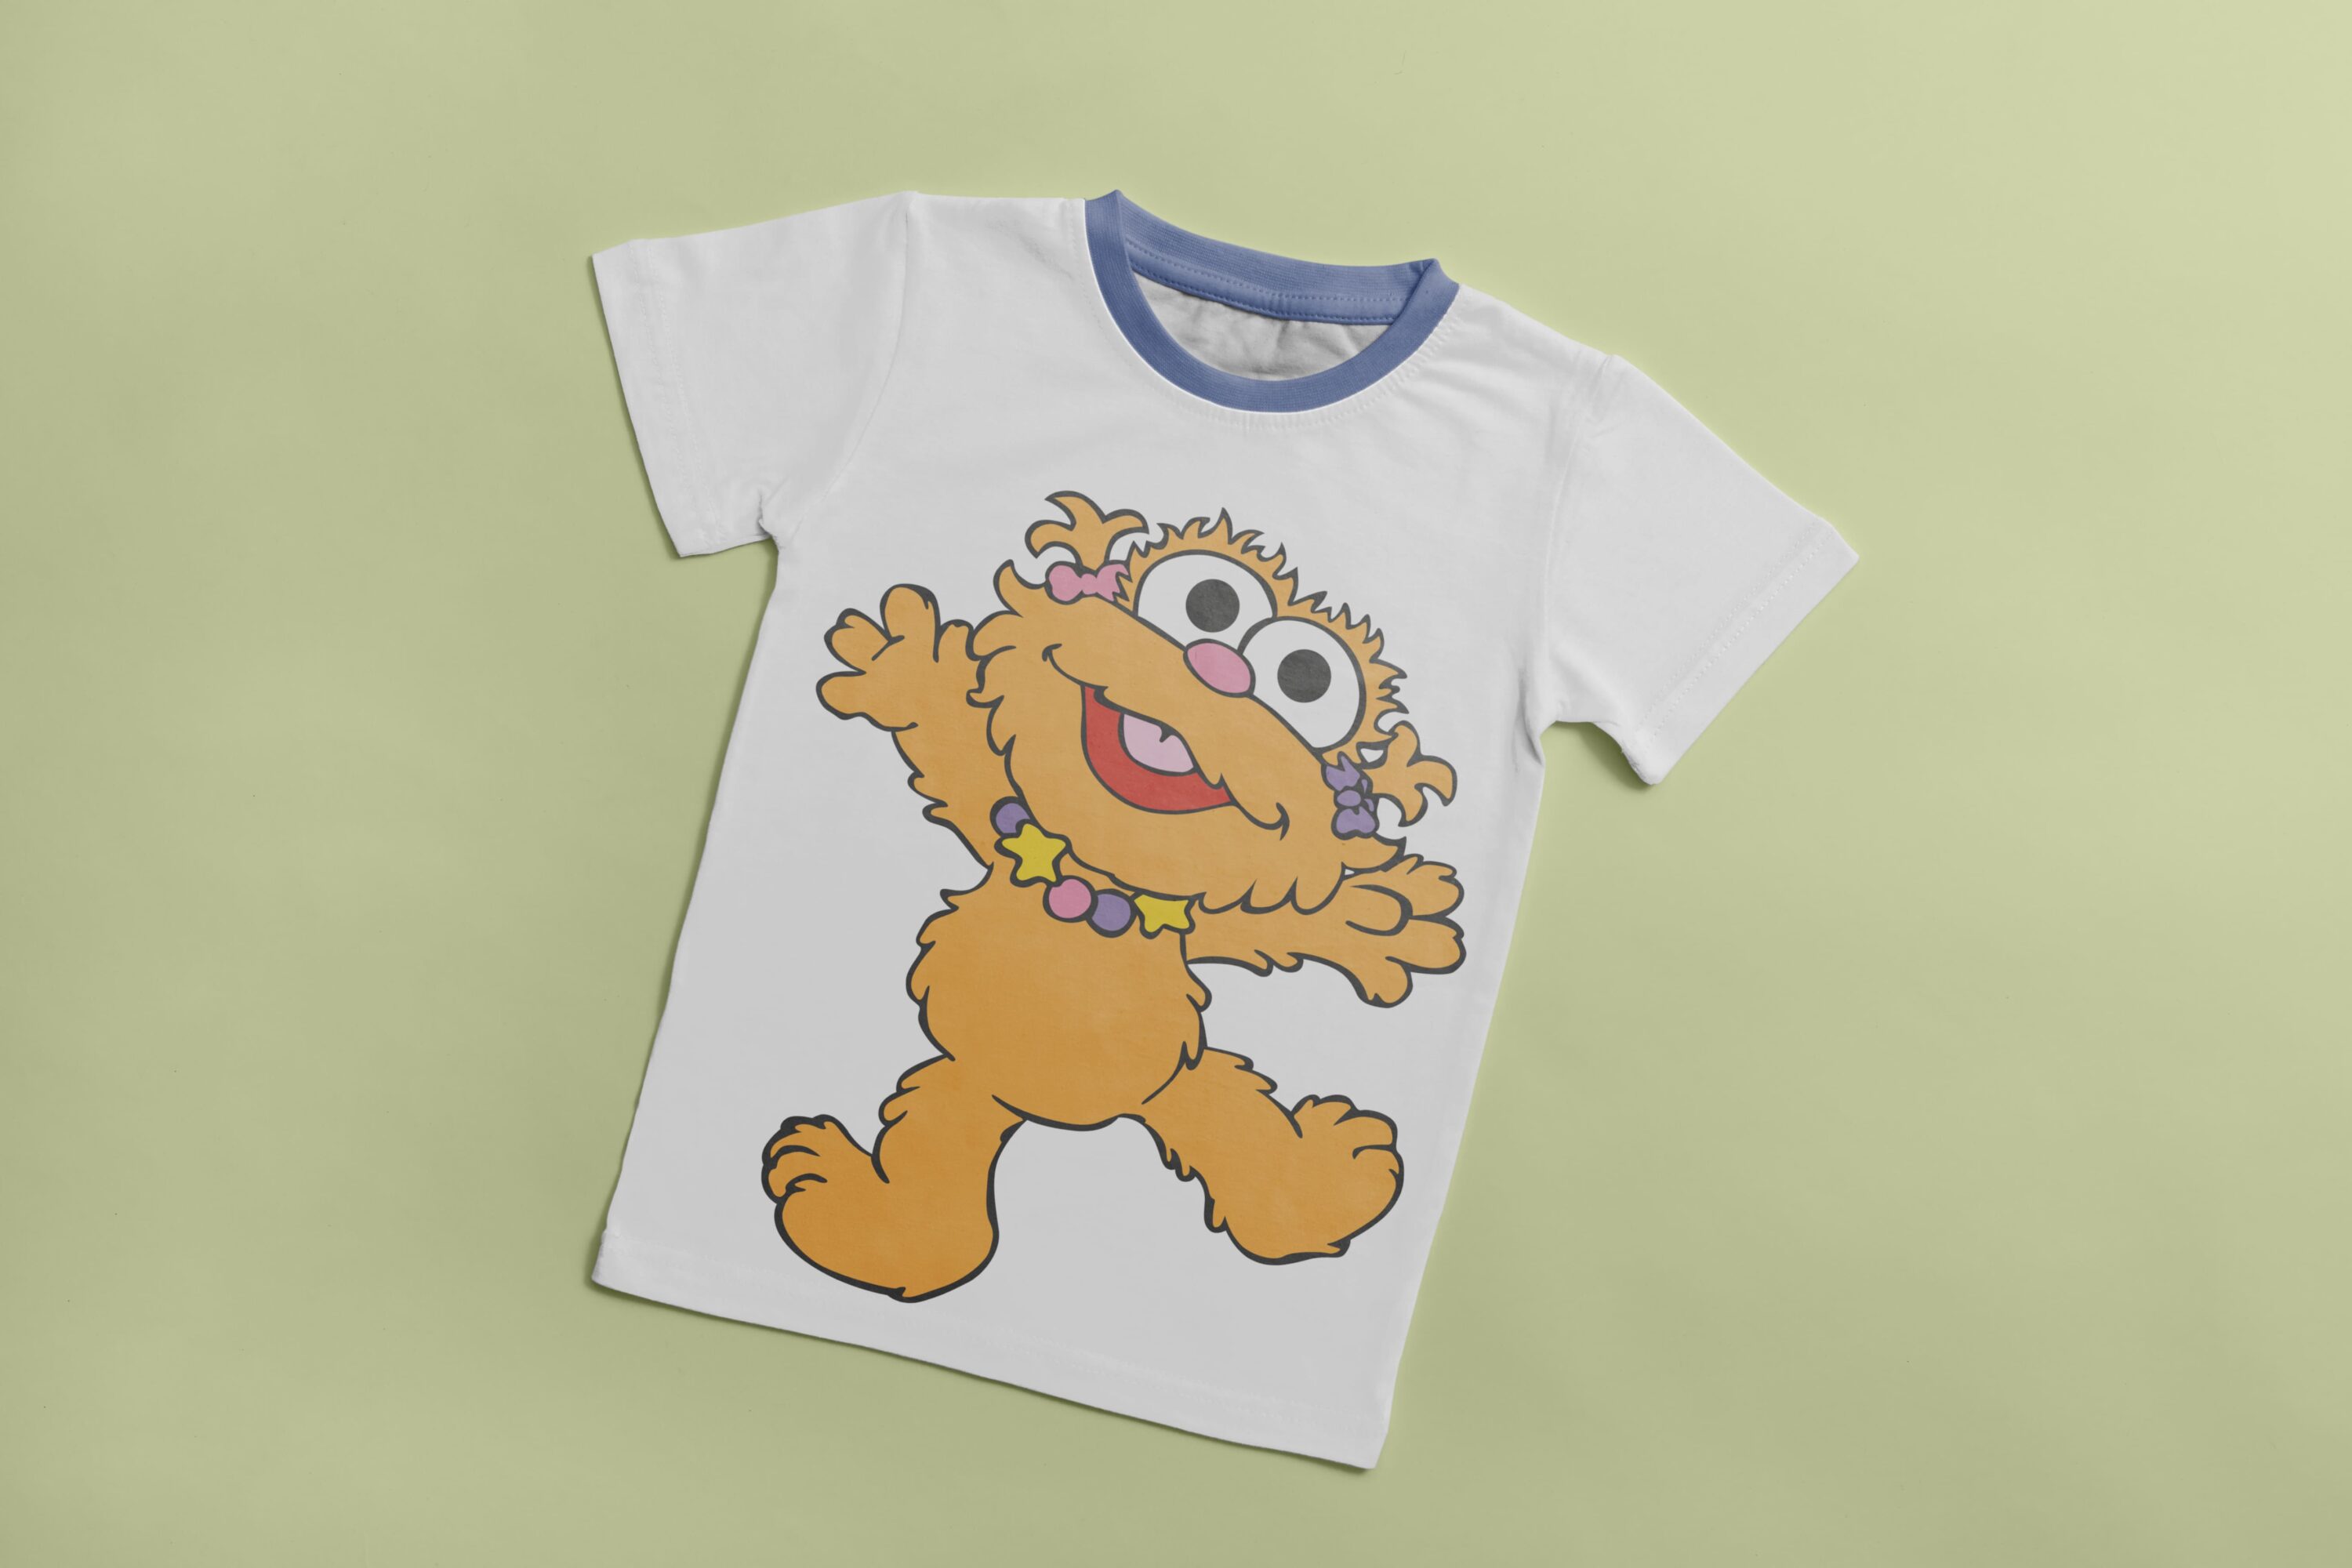 White T-shirt with a blue collar and an image of an yellow funny baby Cookie Monster.